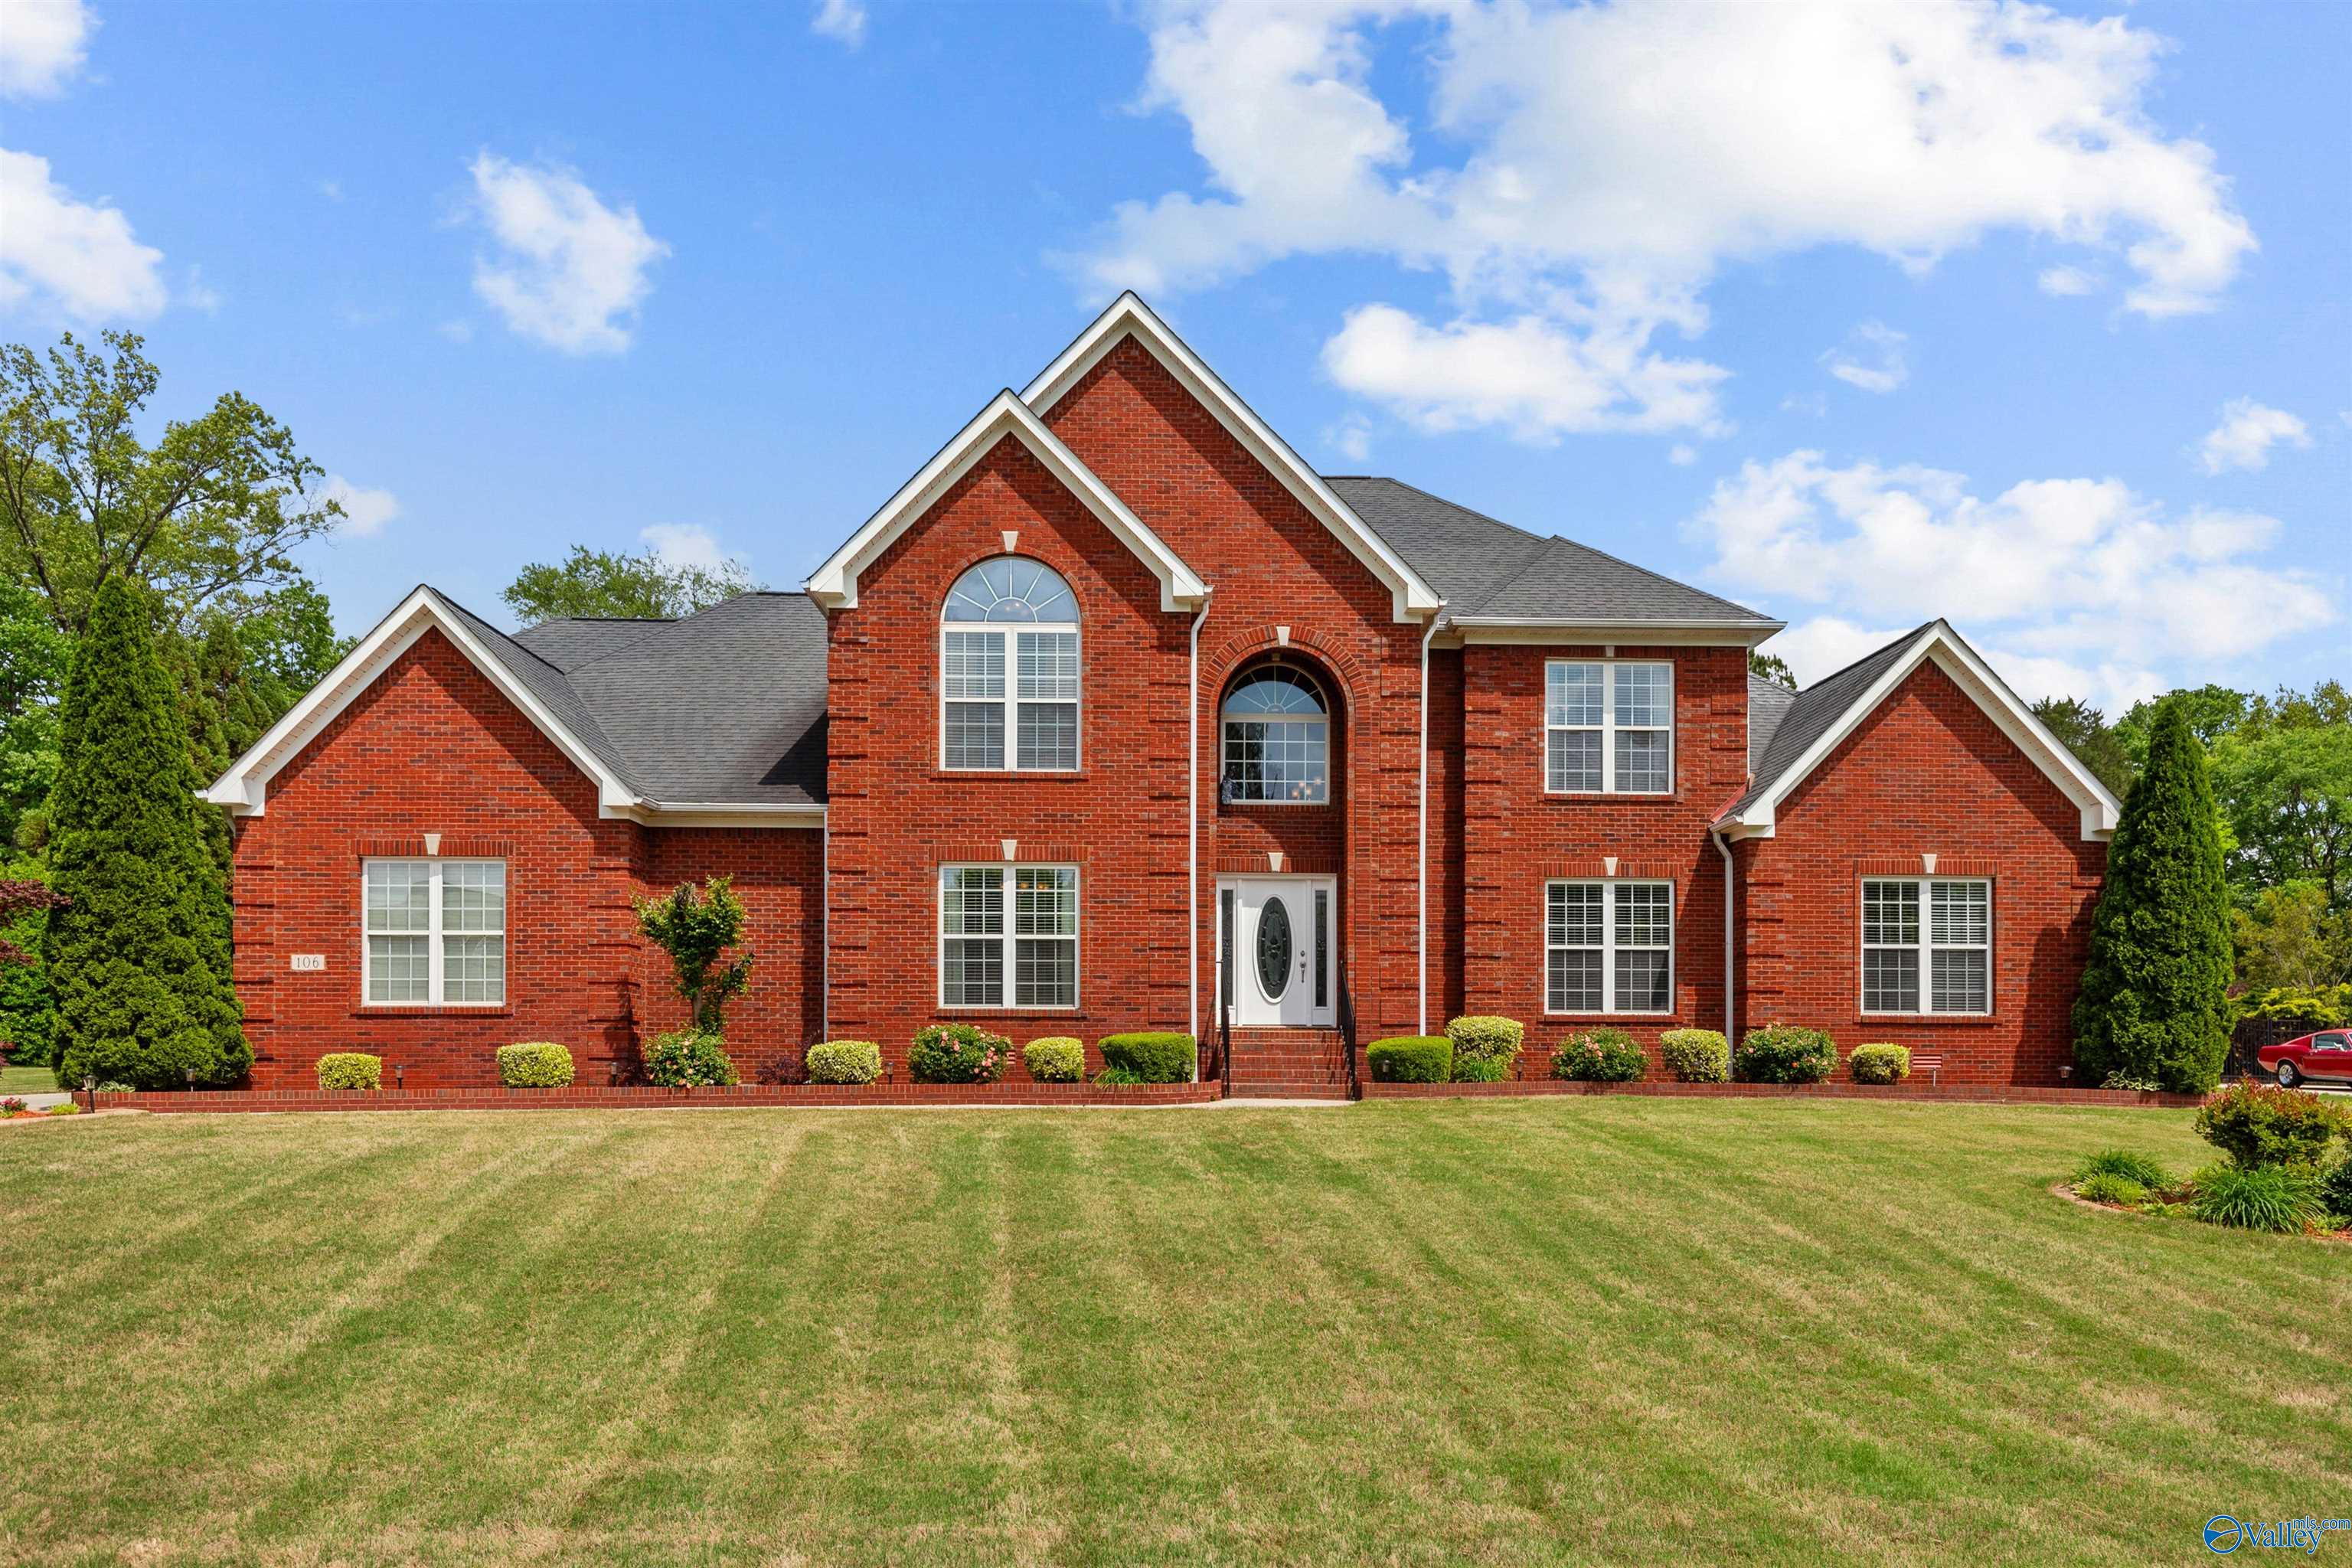 Property: 106 Red Branch Drive,Madison, AL